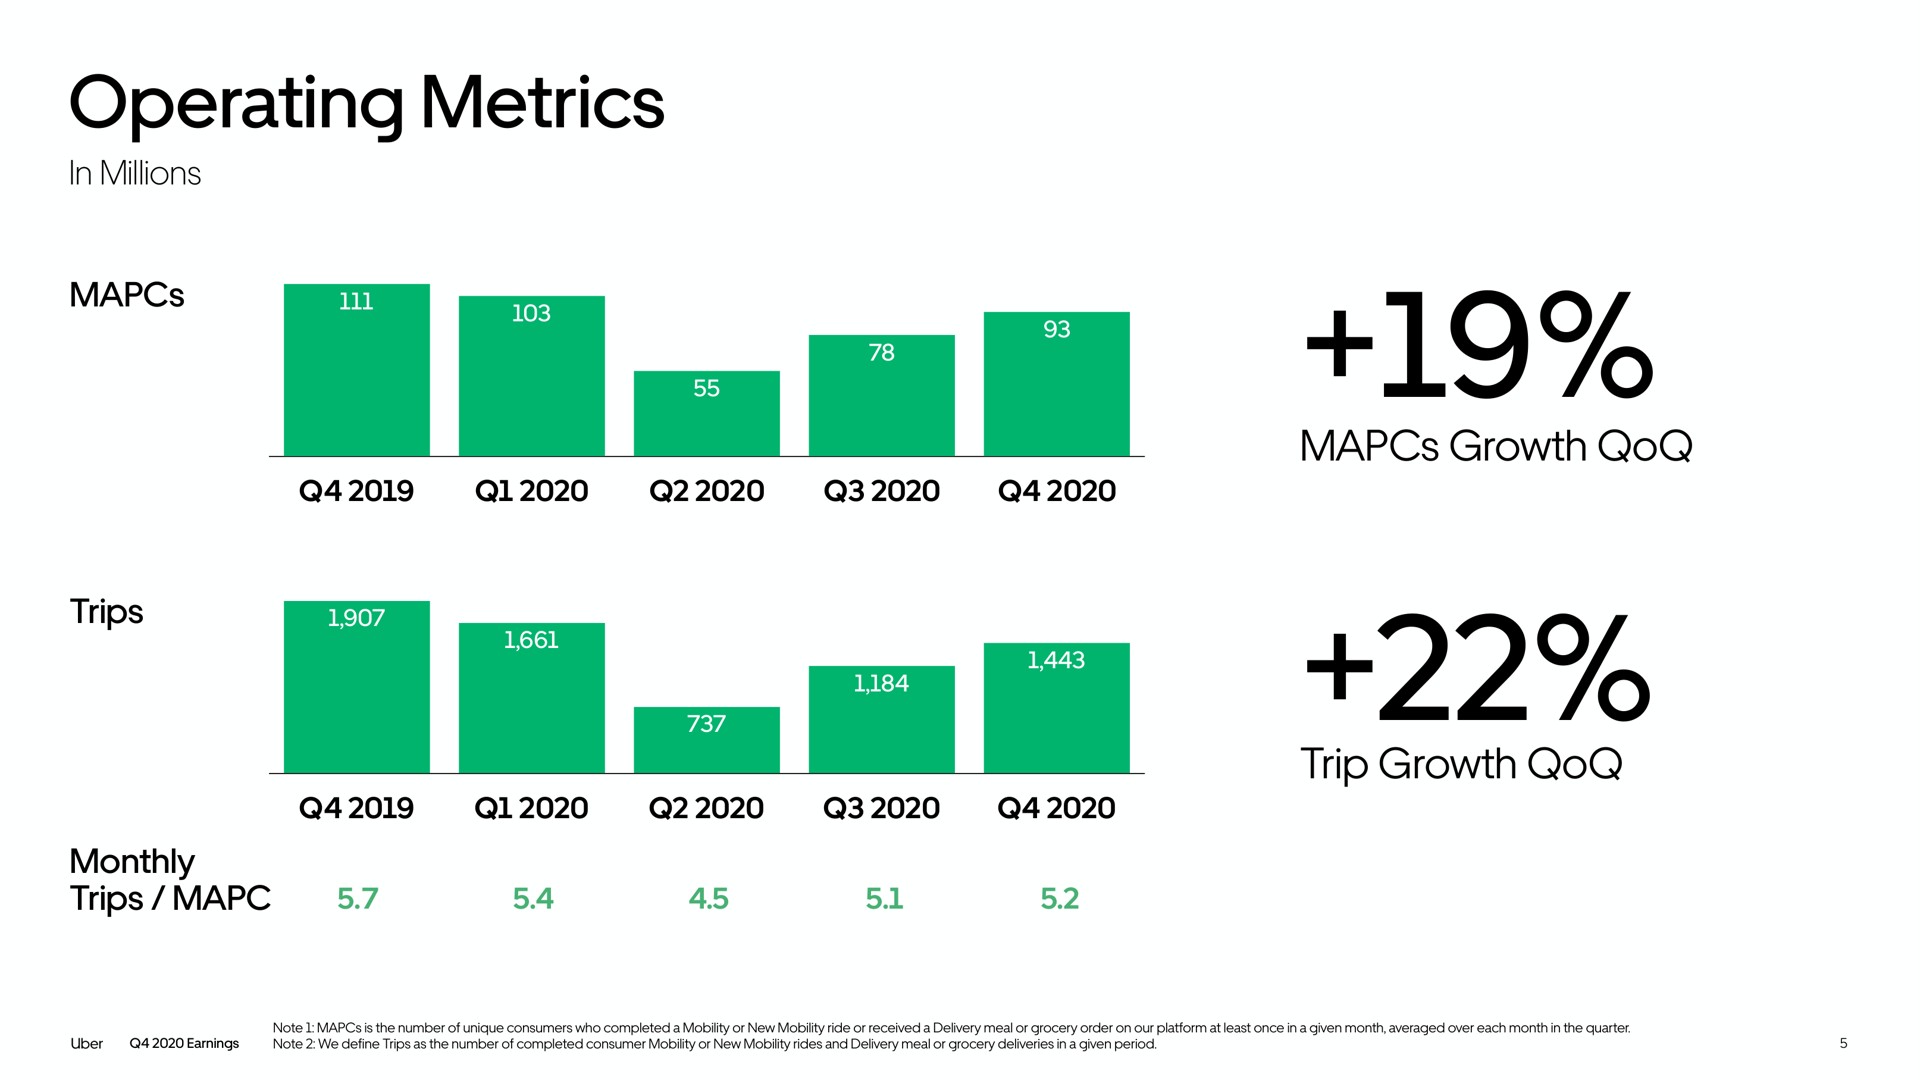 operating metrics growth trip growth trips monthly trips trio | Uber